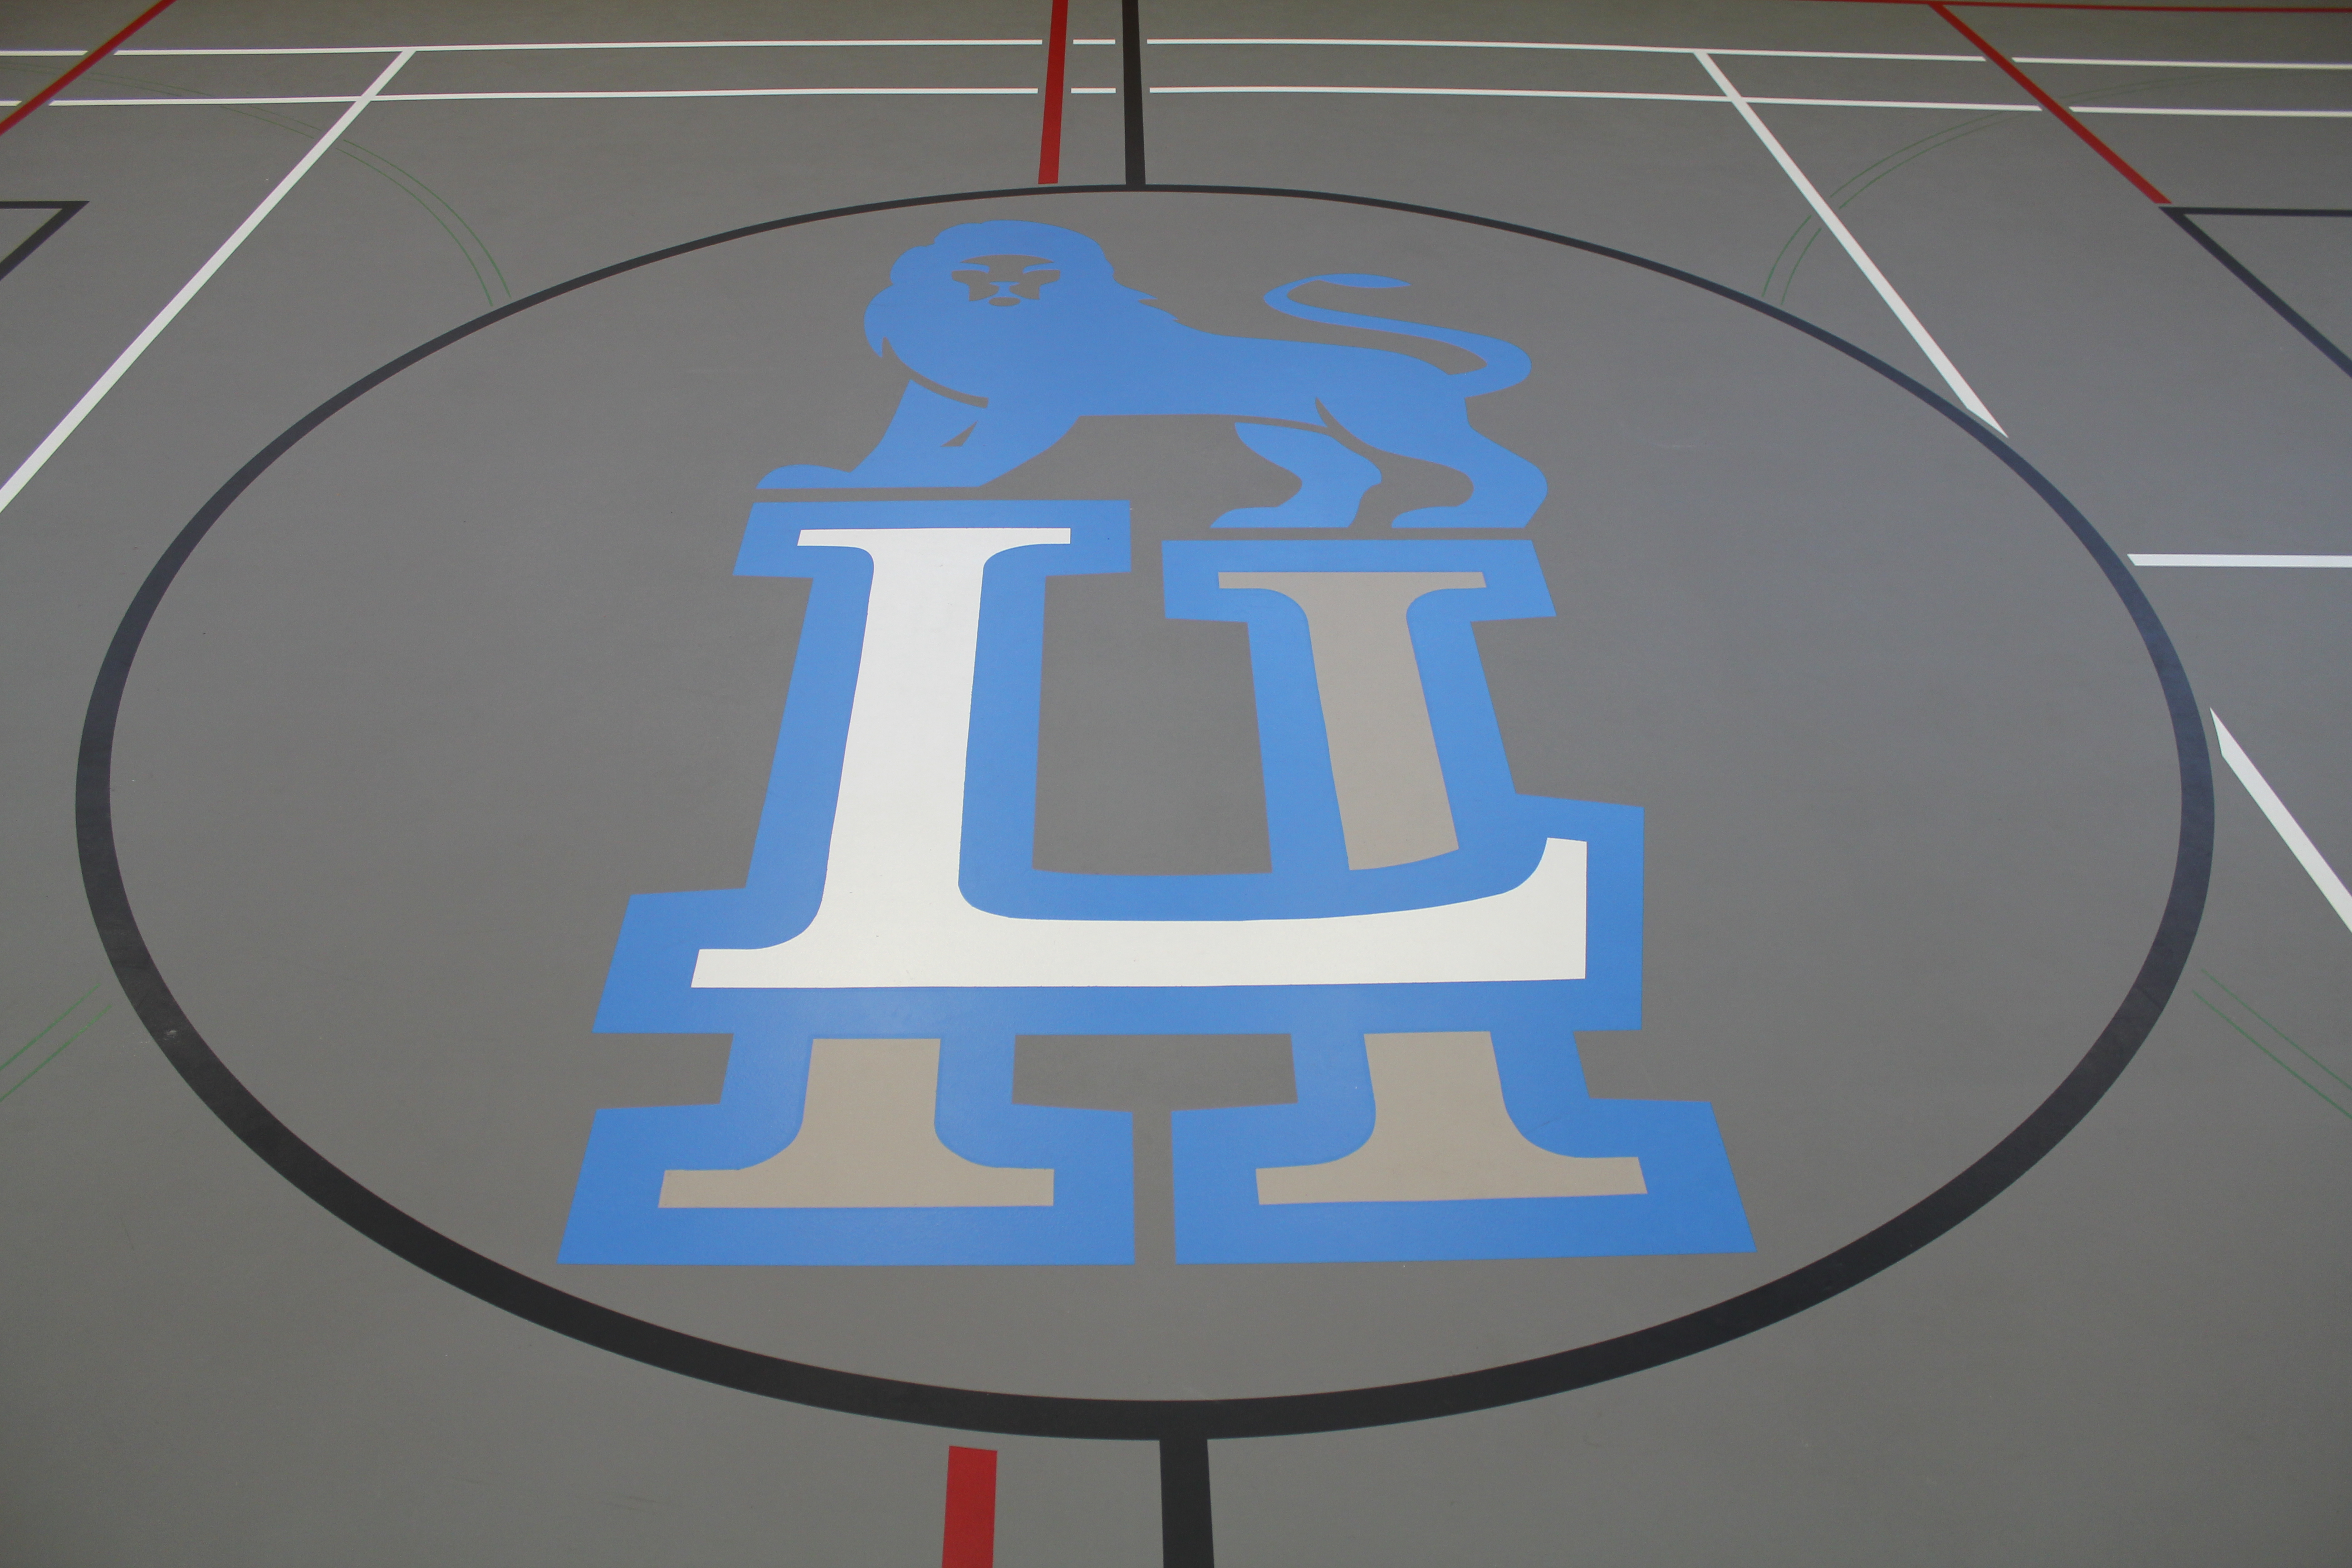 Our Logo on the Gym Floor.